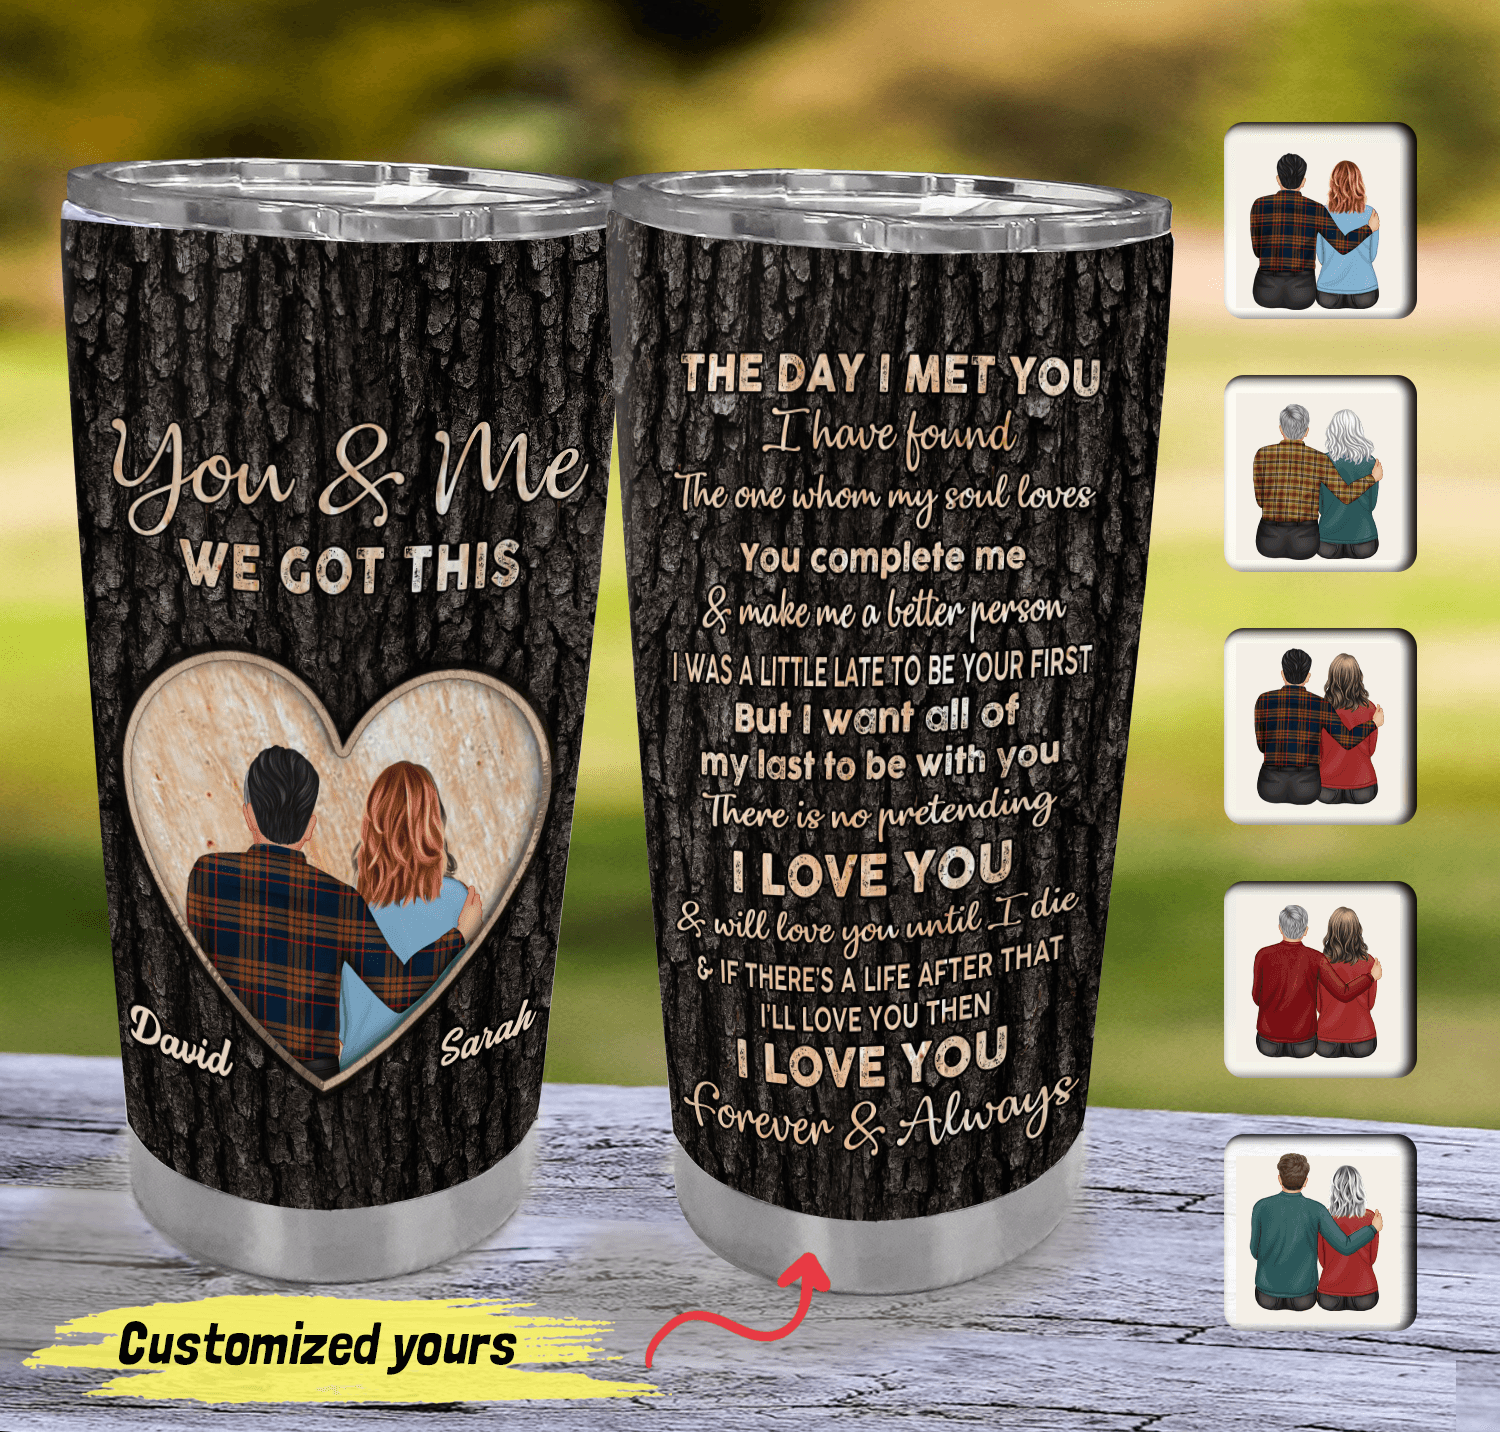 Personalized Valentines Gifts for Husband/Wife, Personalised